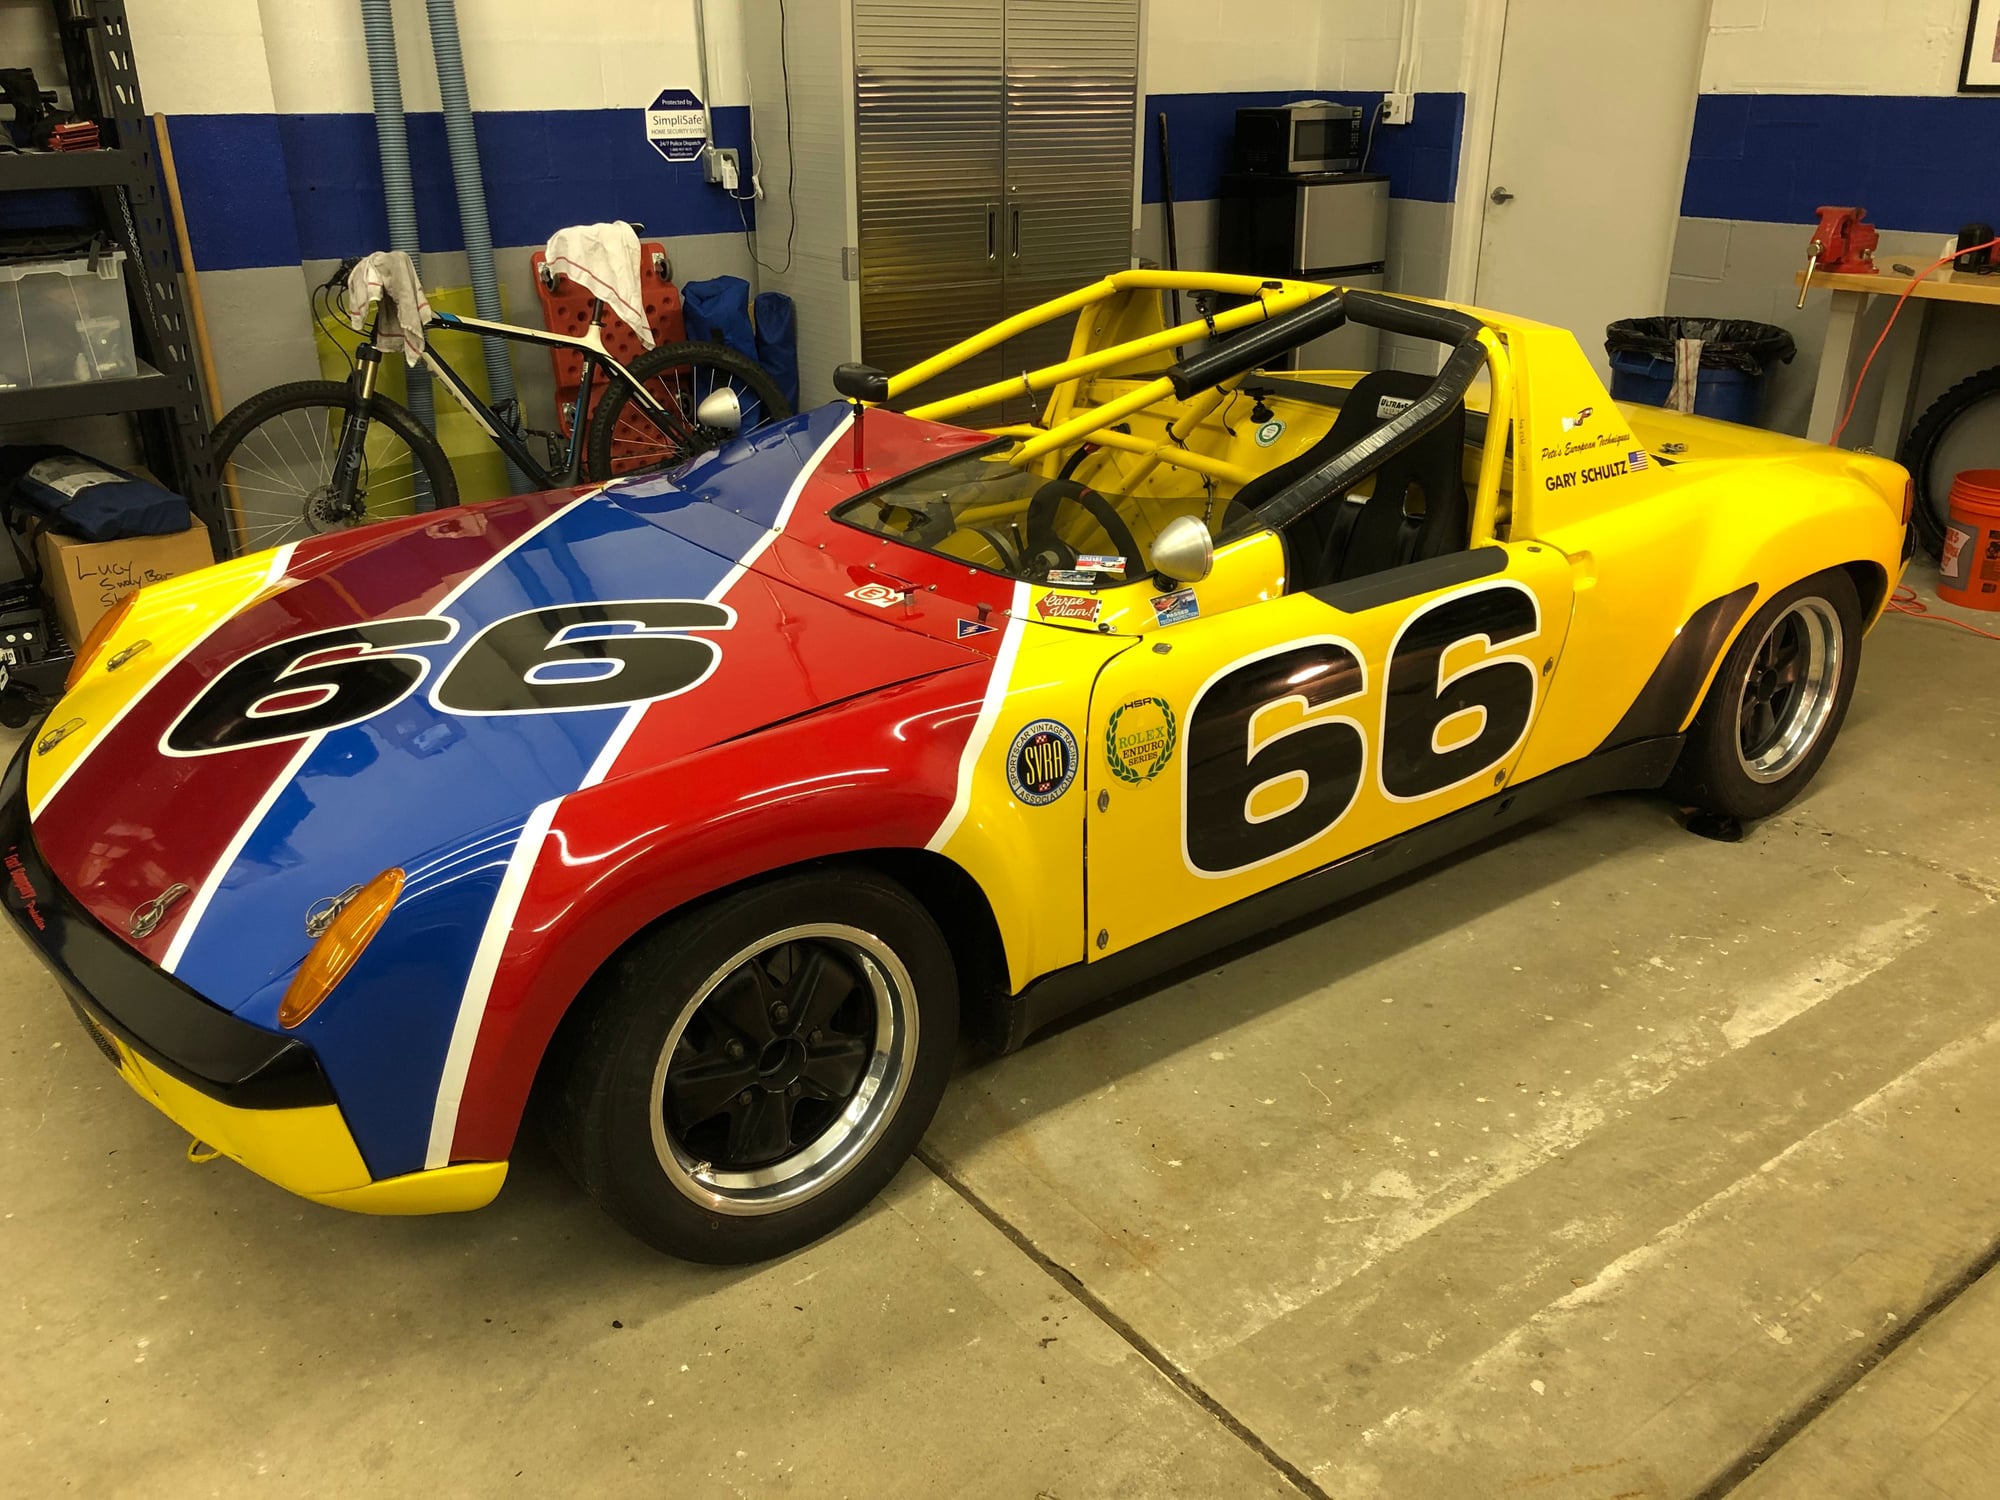 1972 Porsche 914 - 1972 914-6 GT Roadster Vintage Race Car - Used - VIN 4752905999 - 6 cyl - 2WD - Manual - Convertible - Yellow - Pittsburgh, PA 15228, United States